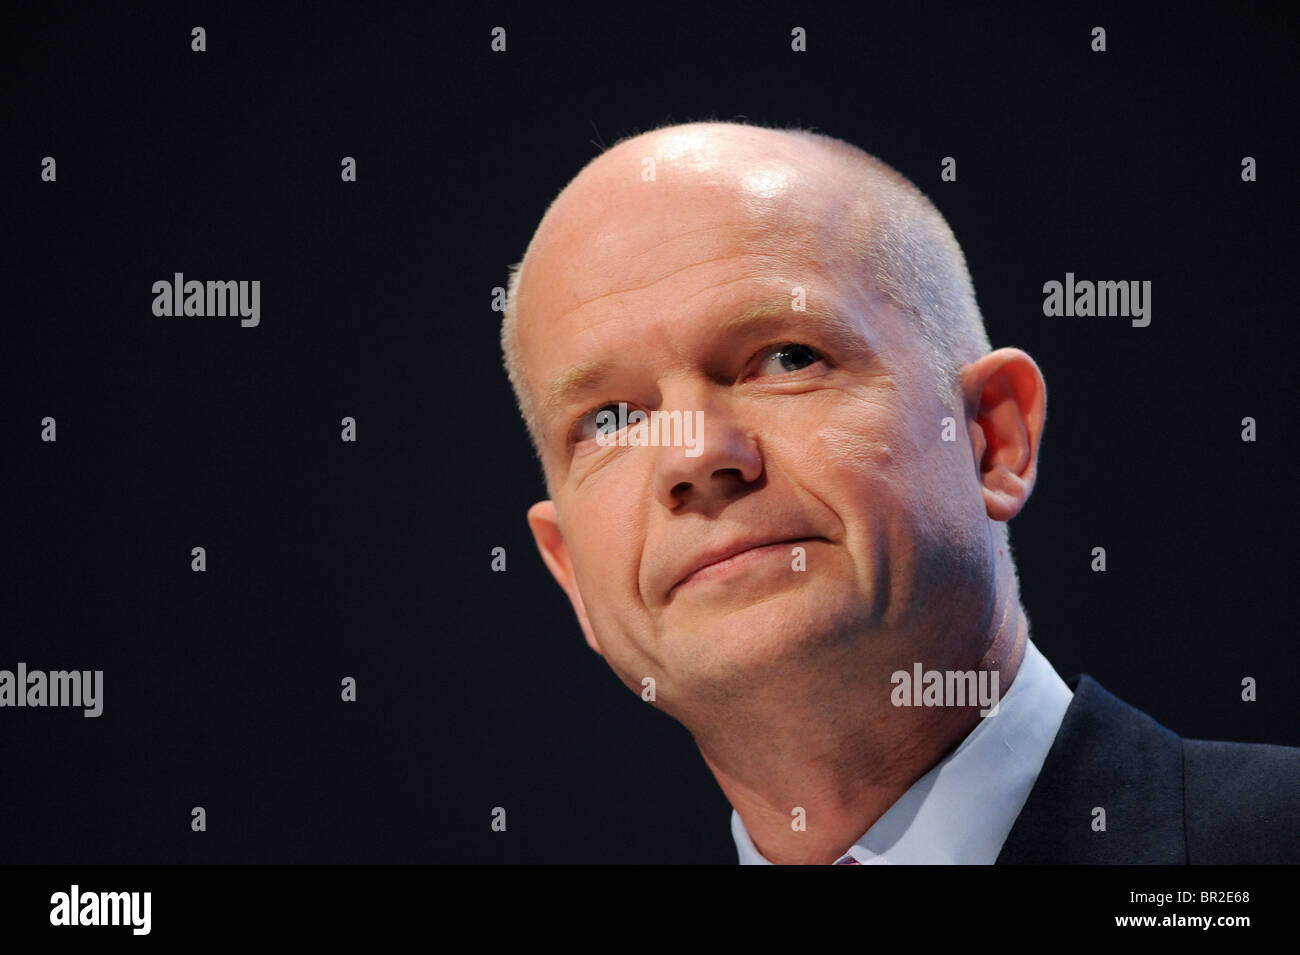 The Rht Hon William Hague attends the Conservative Conference in Manchester, 5th October 2009. Stock Photo